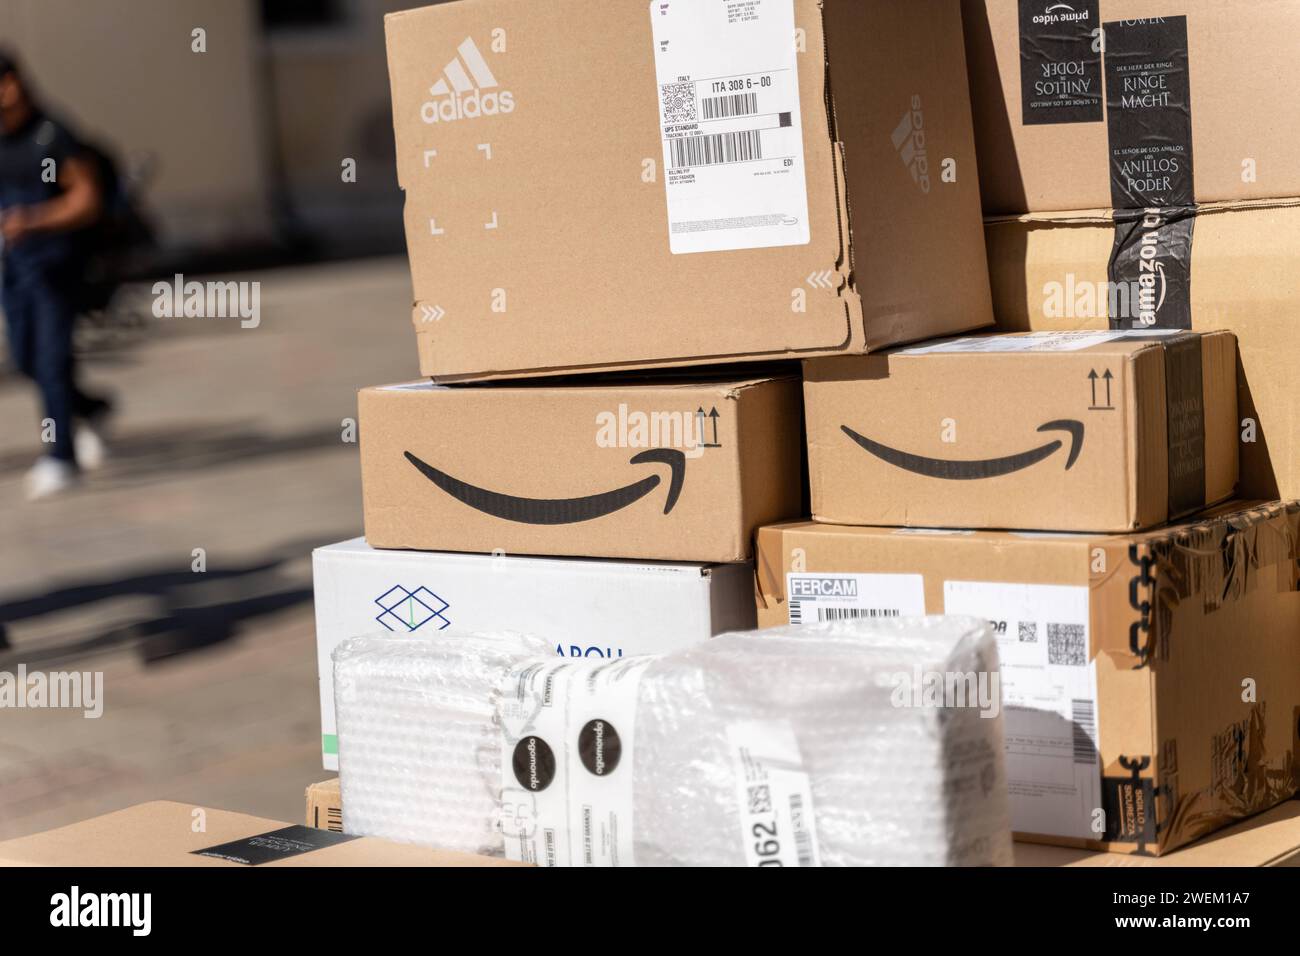 Venice, Italy - September 12, 2022: stacked parcels from a letter carrier in downtown Venice, Italy. Numerous Amazon parcels *** gestapelte Pakete von einem Postboten in Venedig, Italien in der Innenstadt. Zahlreiche Amazon Pakete Stock Photo